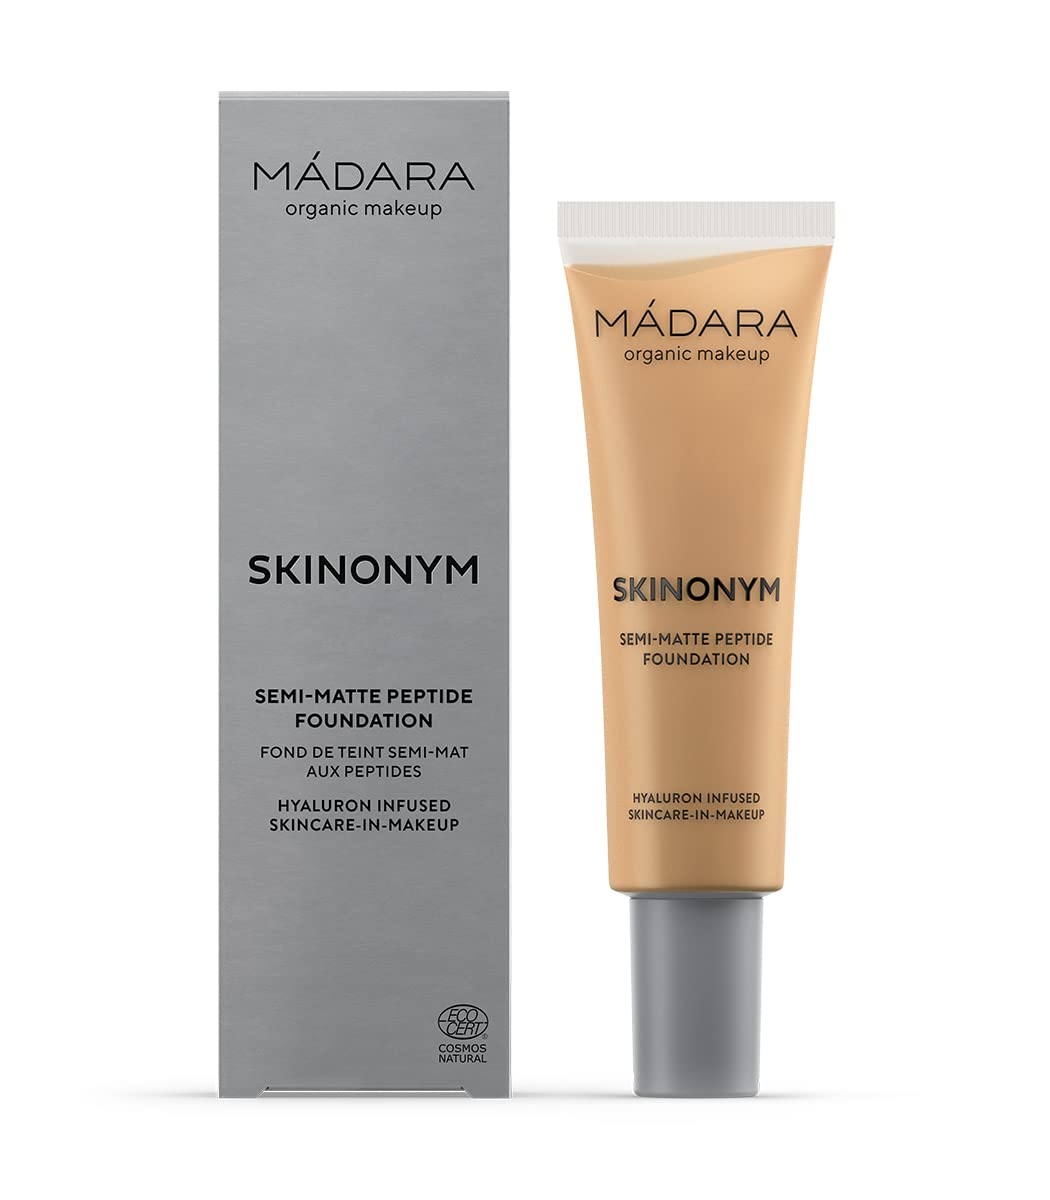 Mádara Organic Skincare | Skinonym semi-mat peptide foundation, 50 Golden Sand, 30 ml-Boosted by Collagen-Supporting Peptides, Semi-Matte Finish, Adapts to the Skin \ 'S Texture